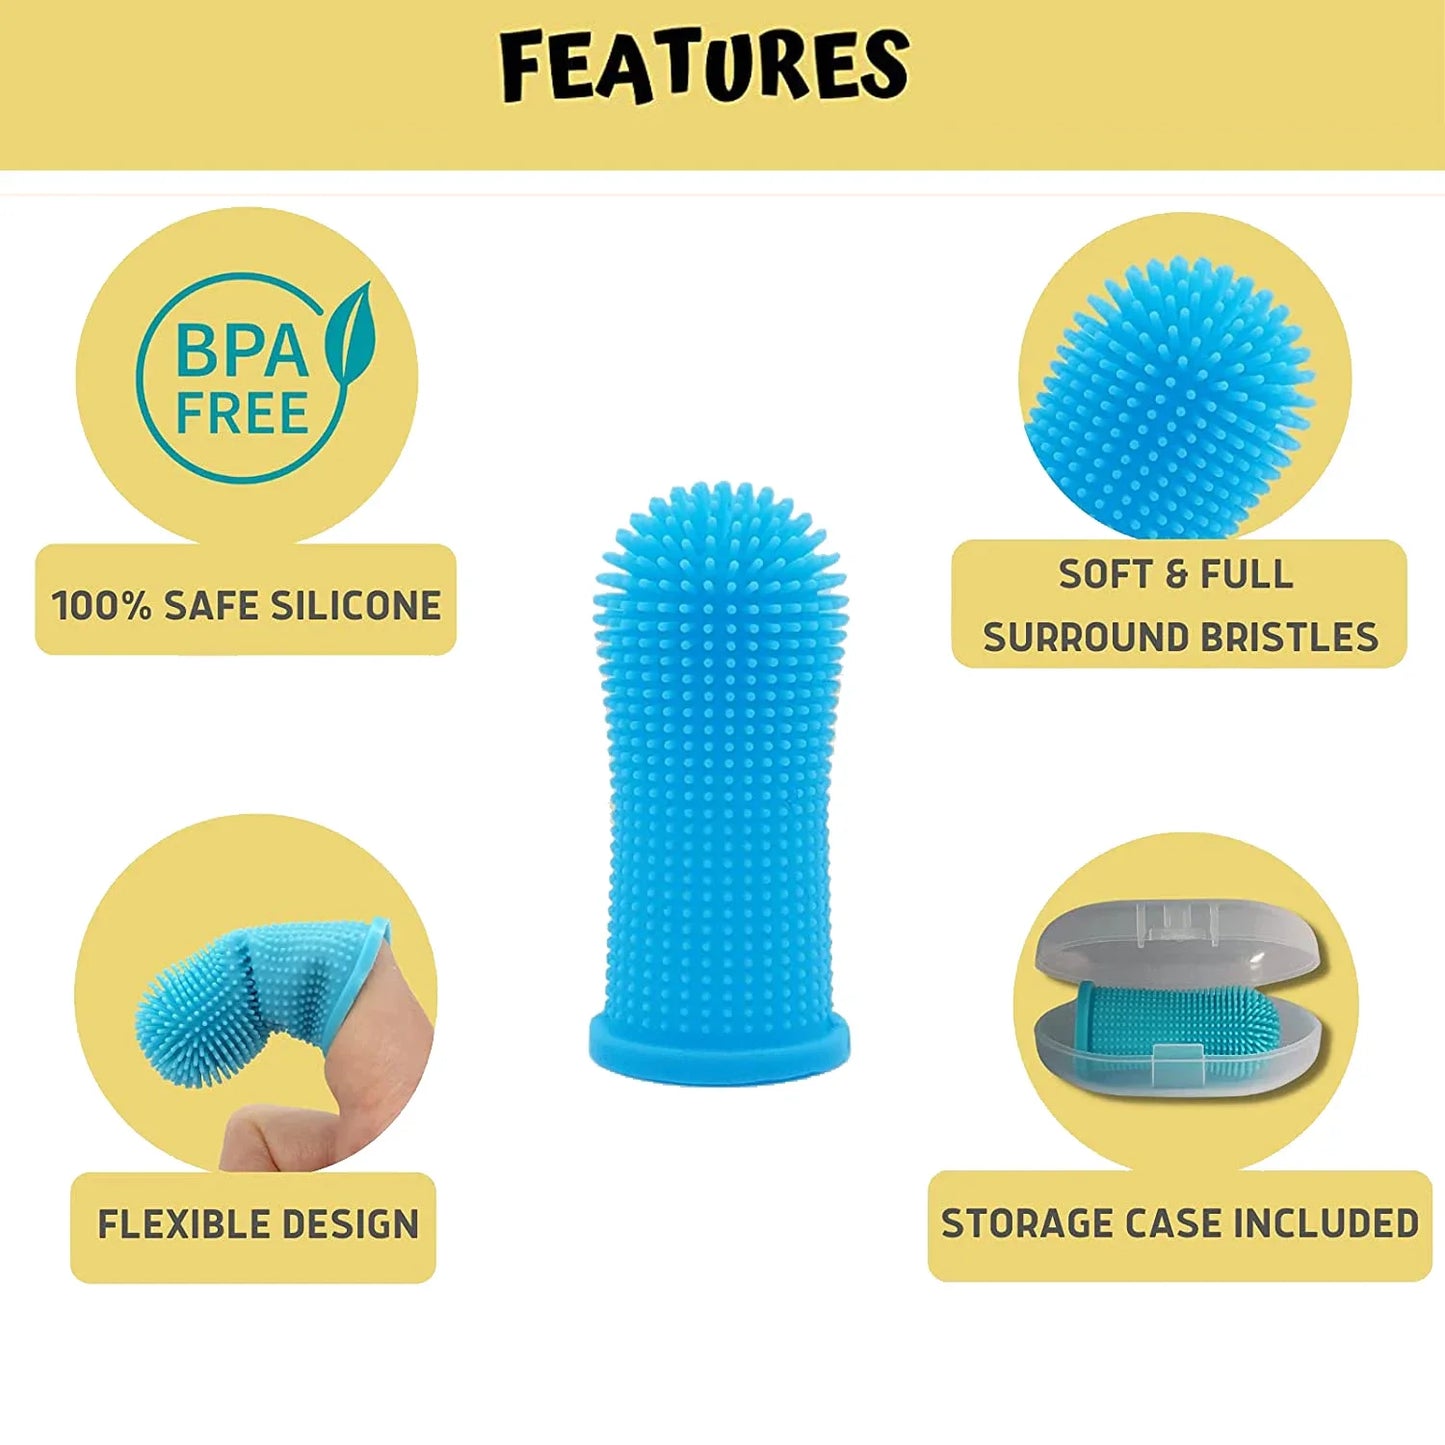 Silicone Pet Finger Toothbrush